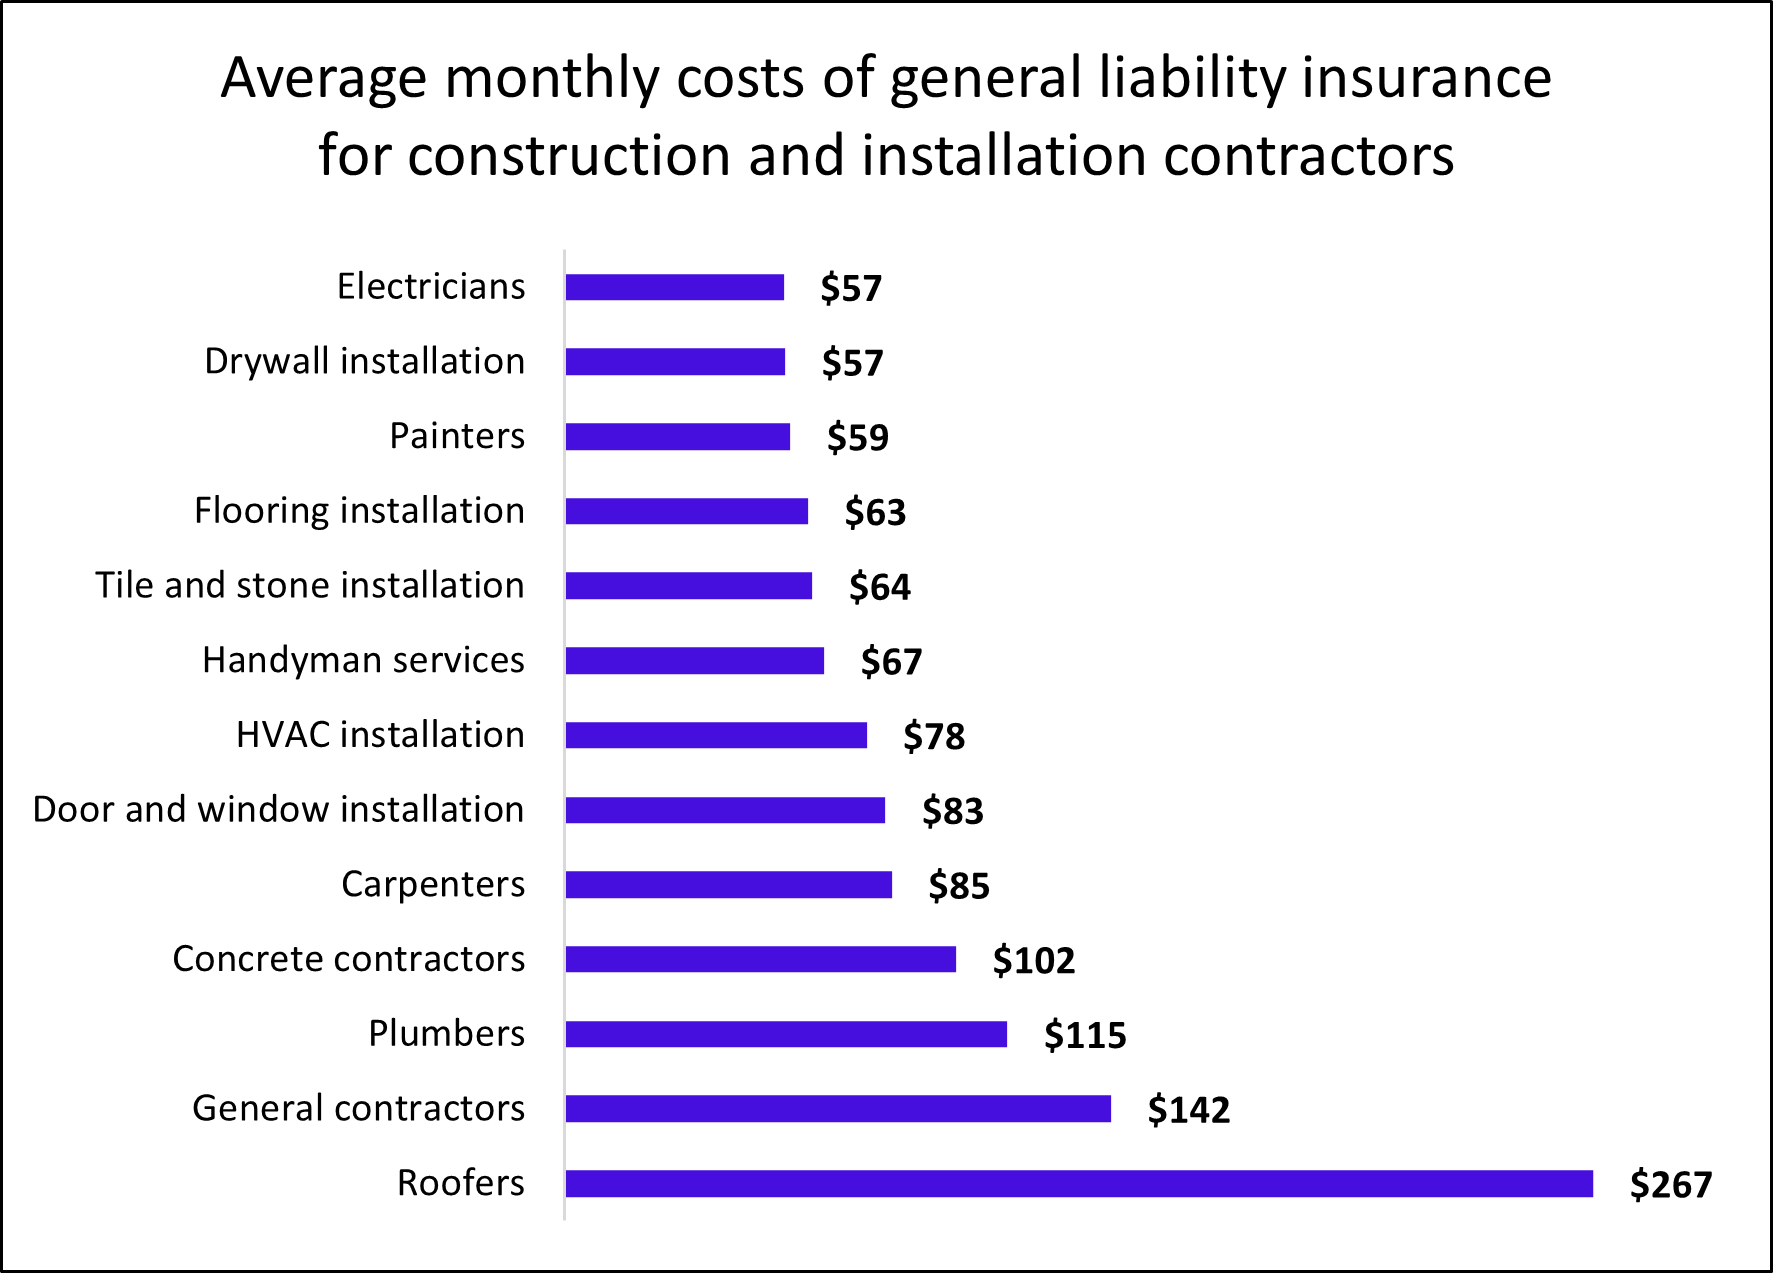 Average monthly costs of general liability insurance for construction and installation contractors.